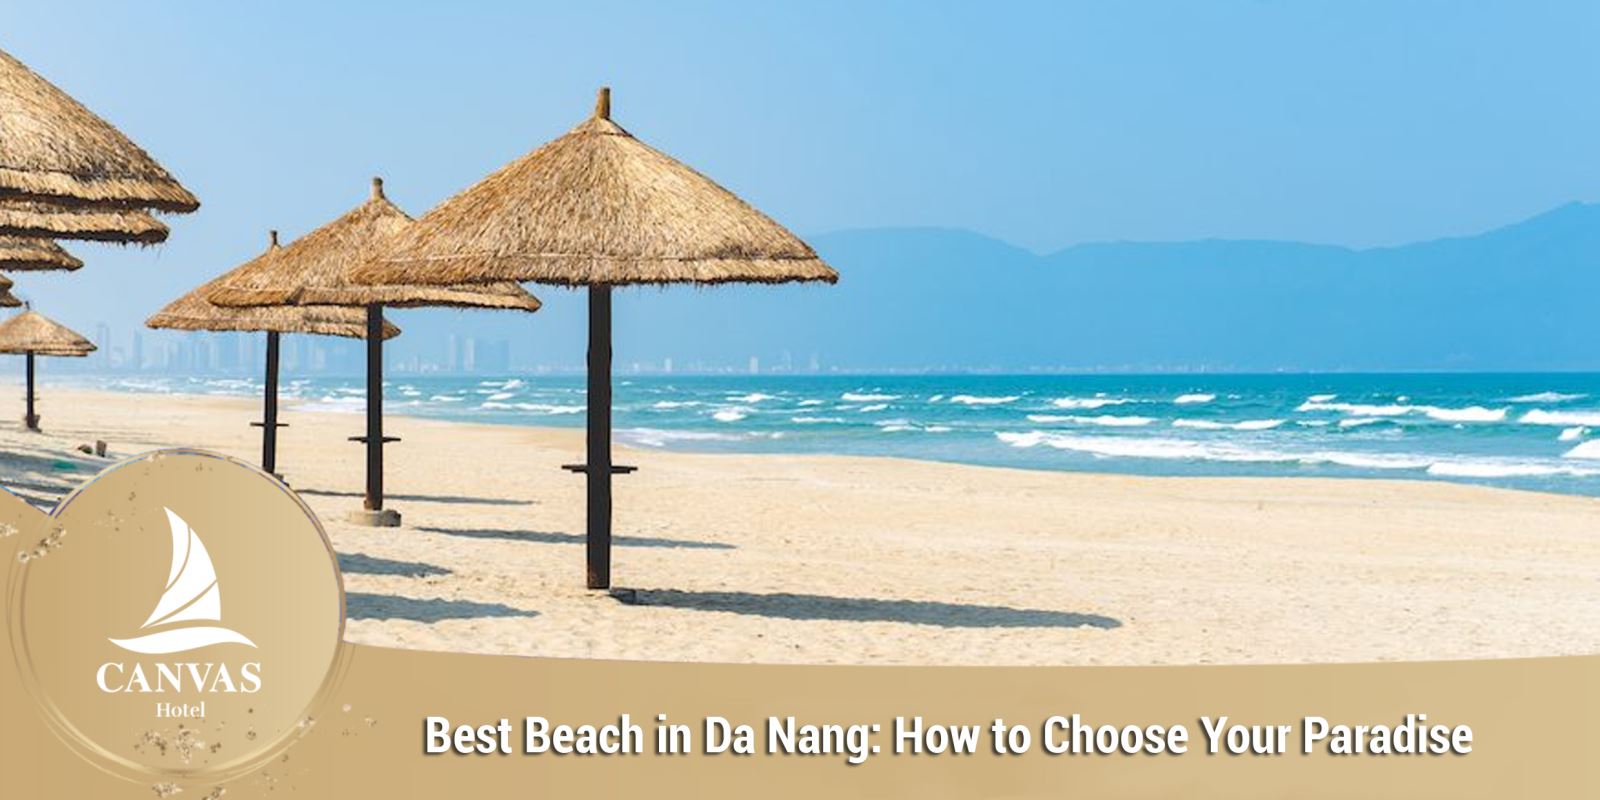 Best Beach in Da Nang: How to Choose Your Paradise